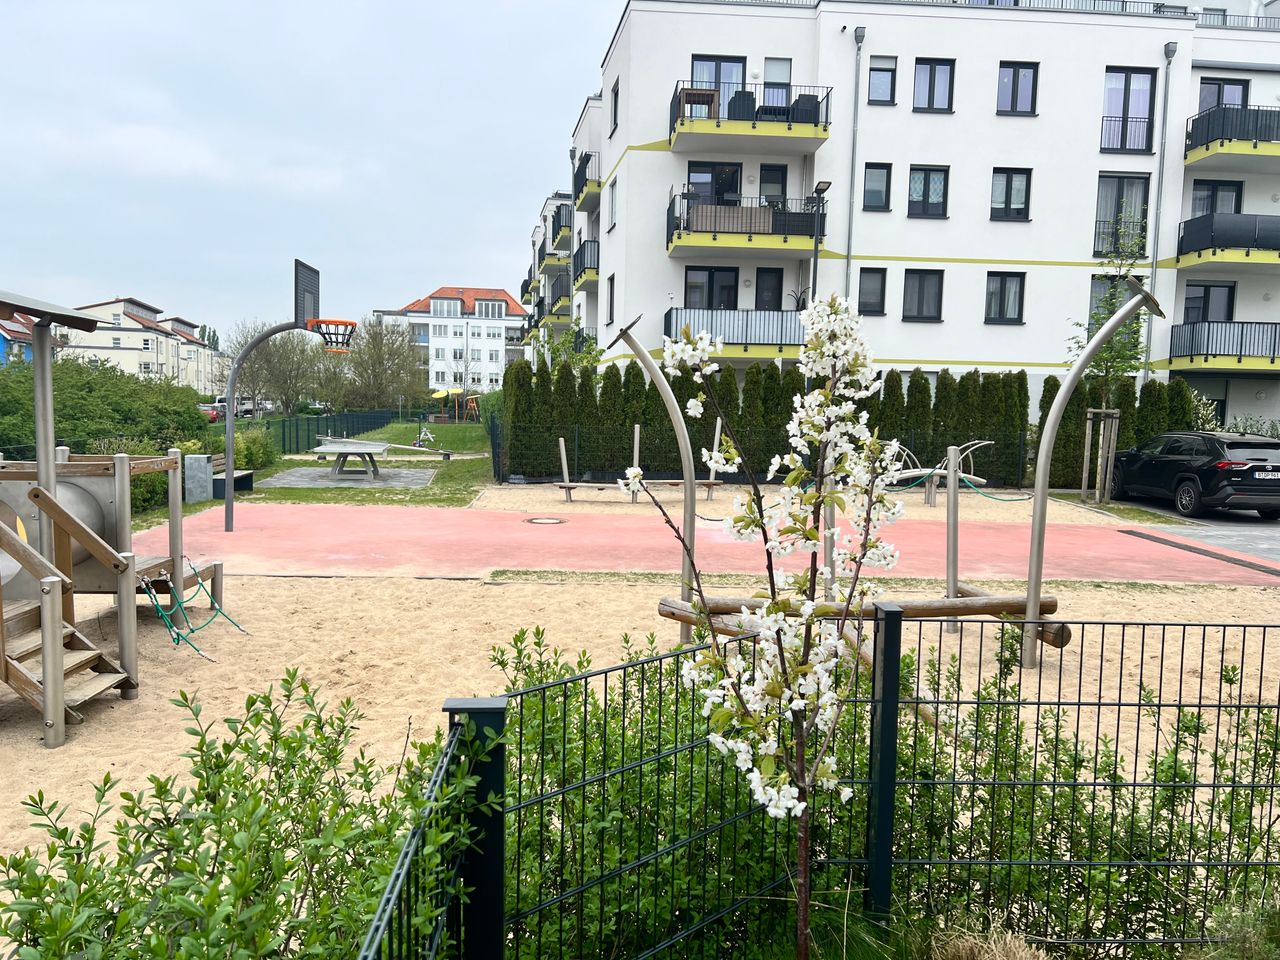 Welcoming 3-Bedroom Apartment with Private Garden in Spandau near Hahneberg – Furnished and Ideal for Families